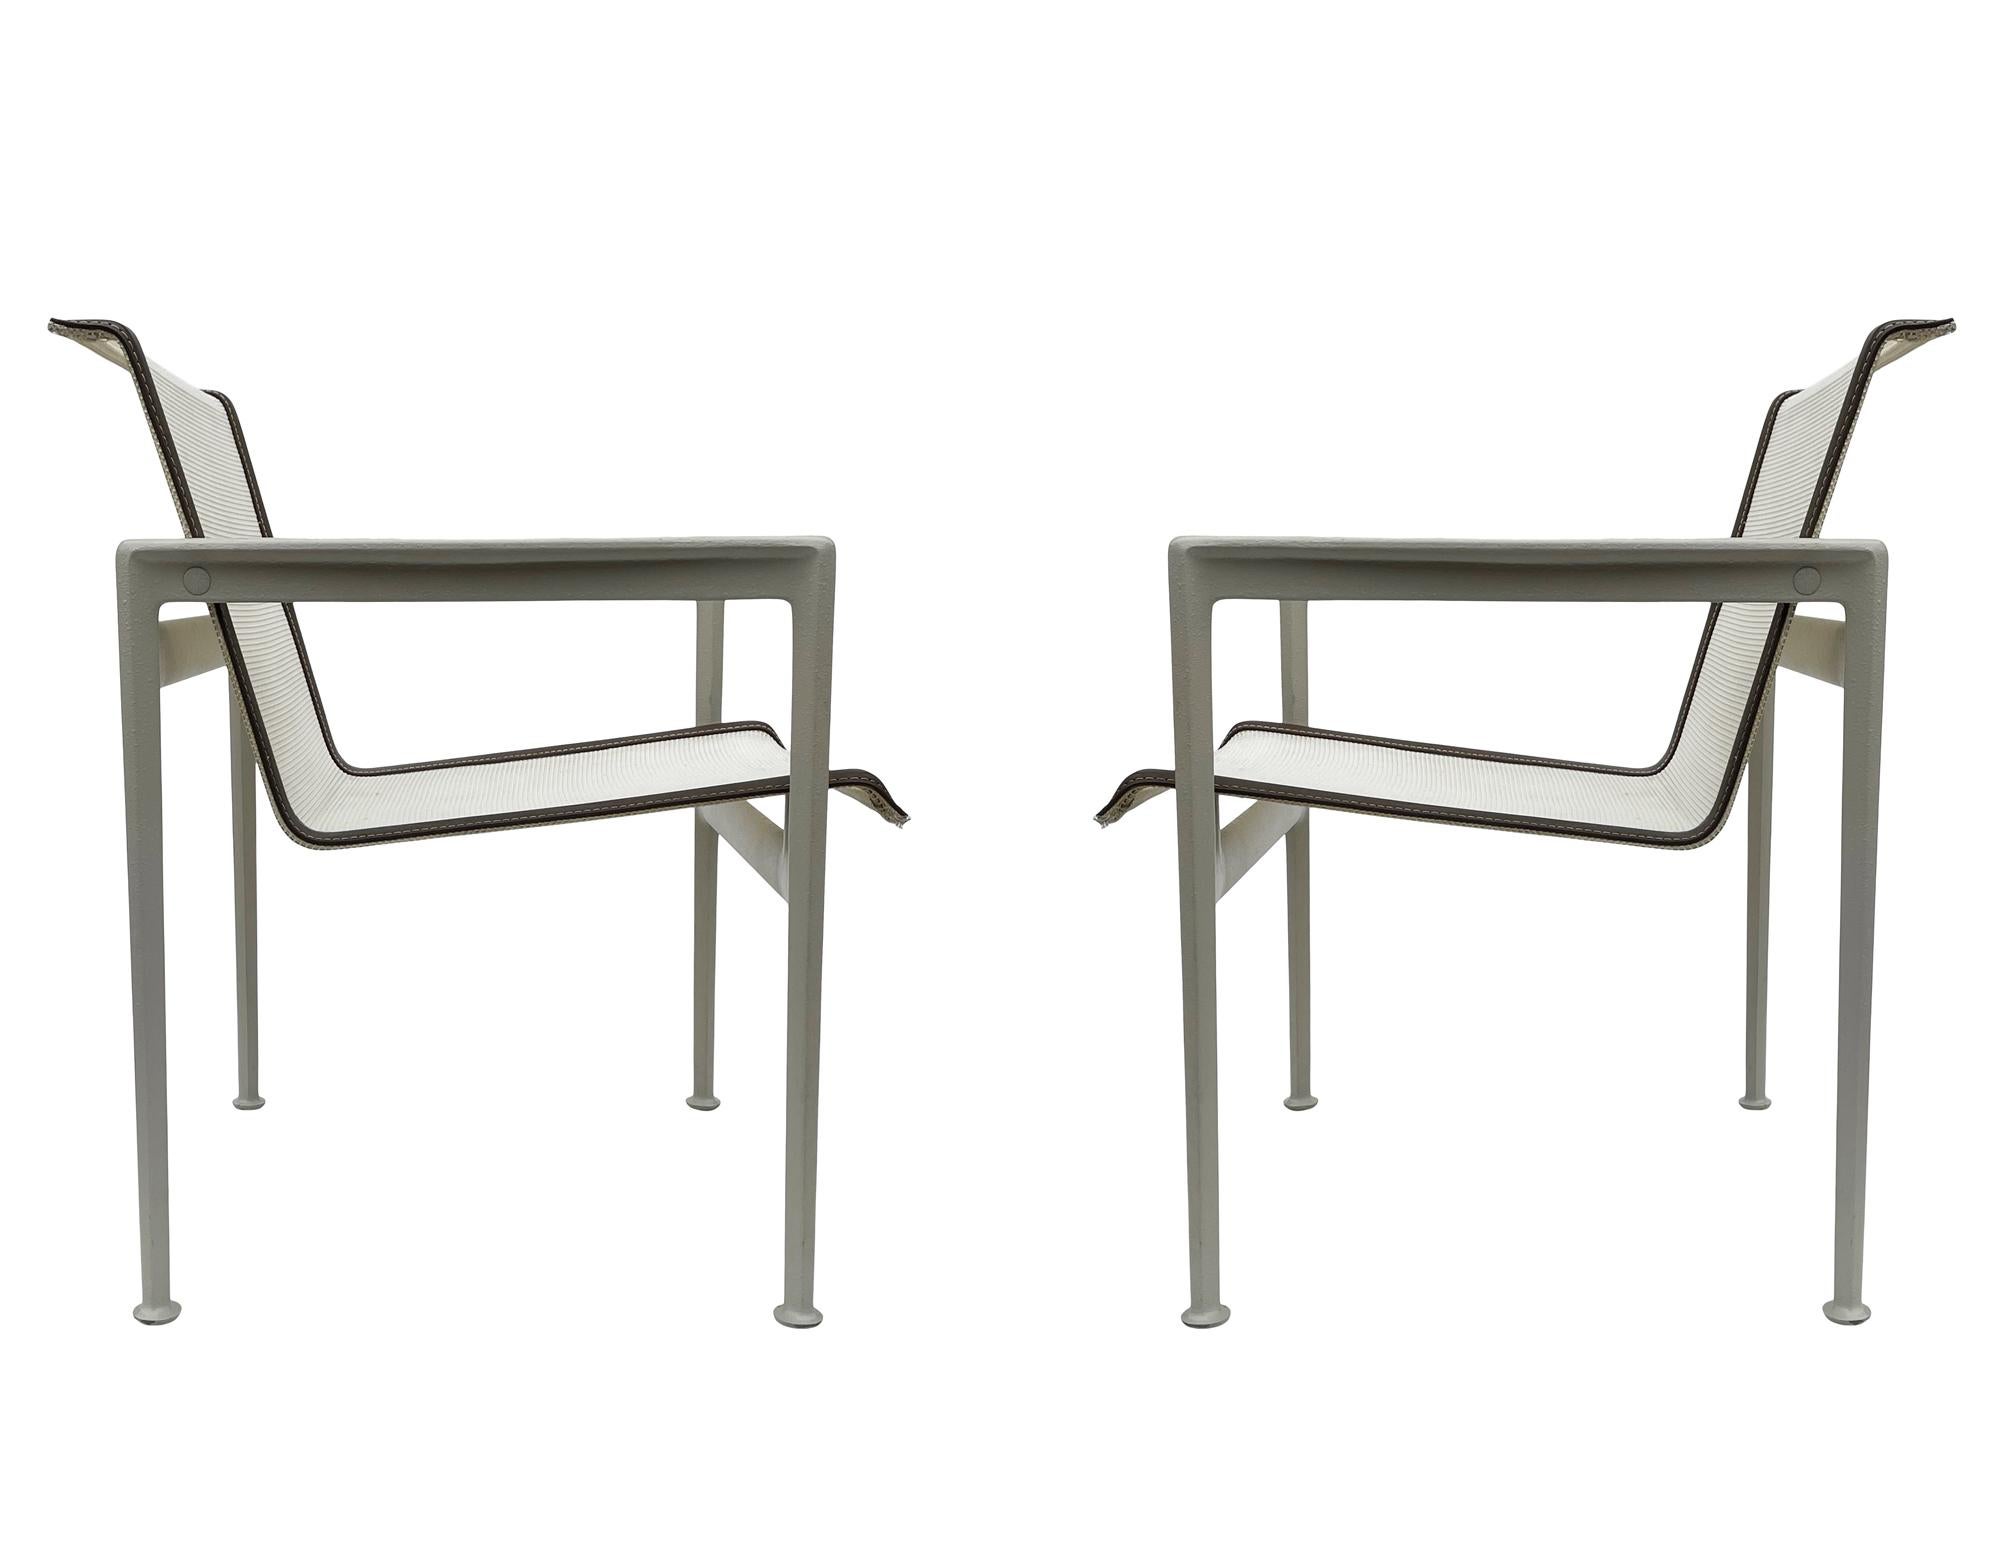 American Matching Pair of Mid-Century Modern Outdoor Patio Armchairs by Richard Schultz